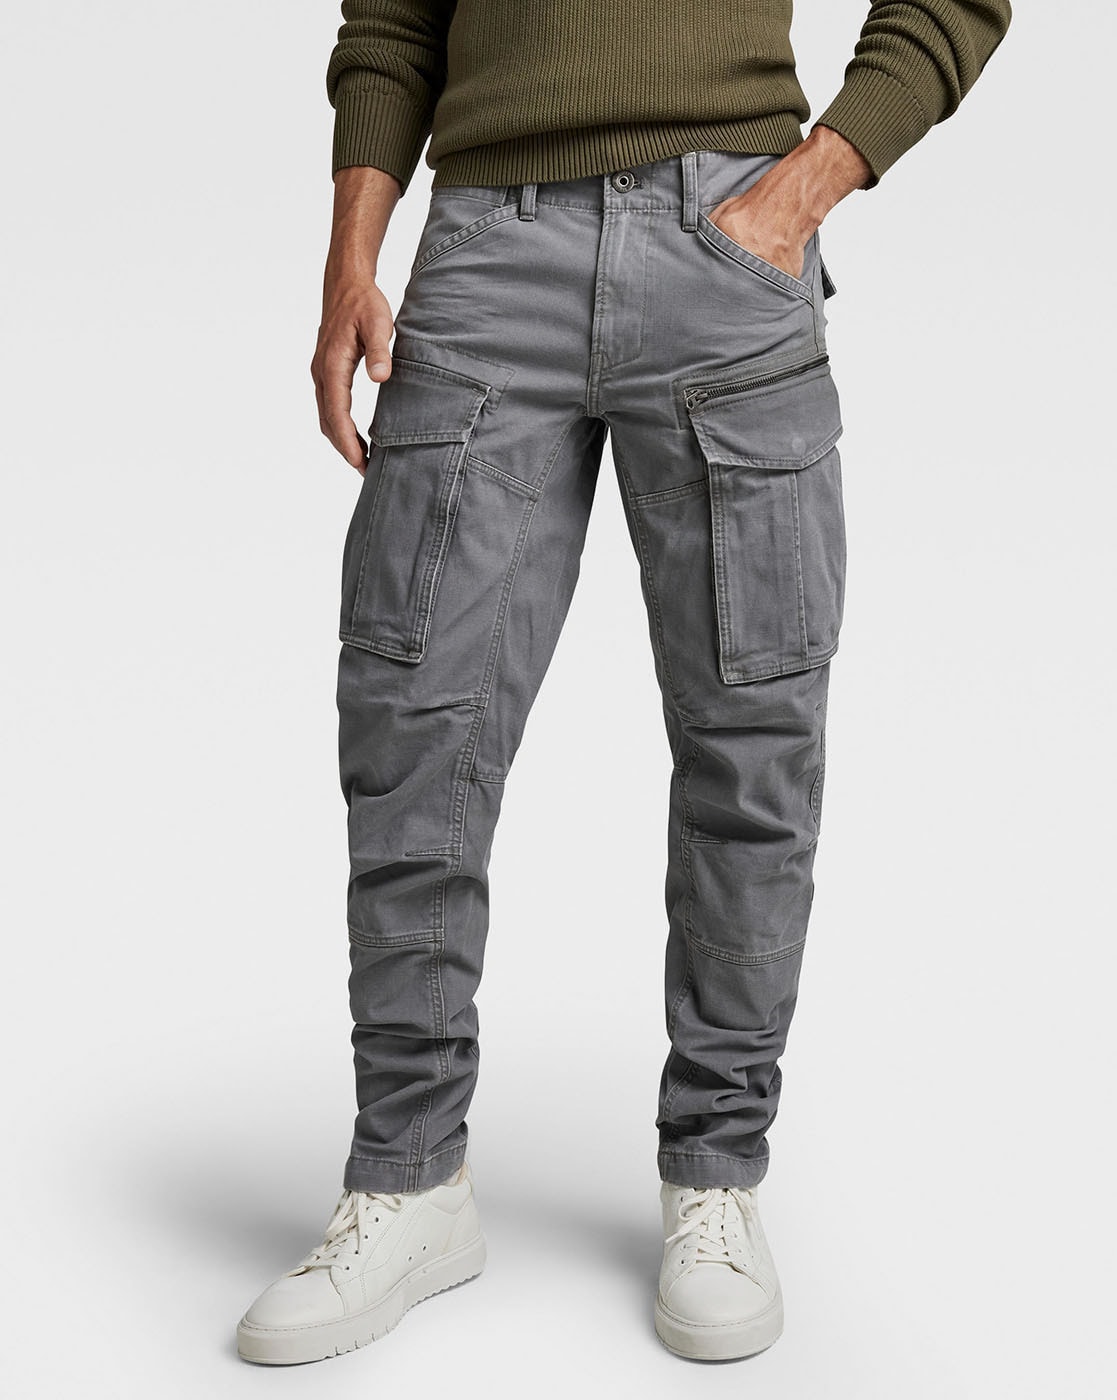 Buy Grey Trousers Pants for by G RAW Online | Ajio.com